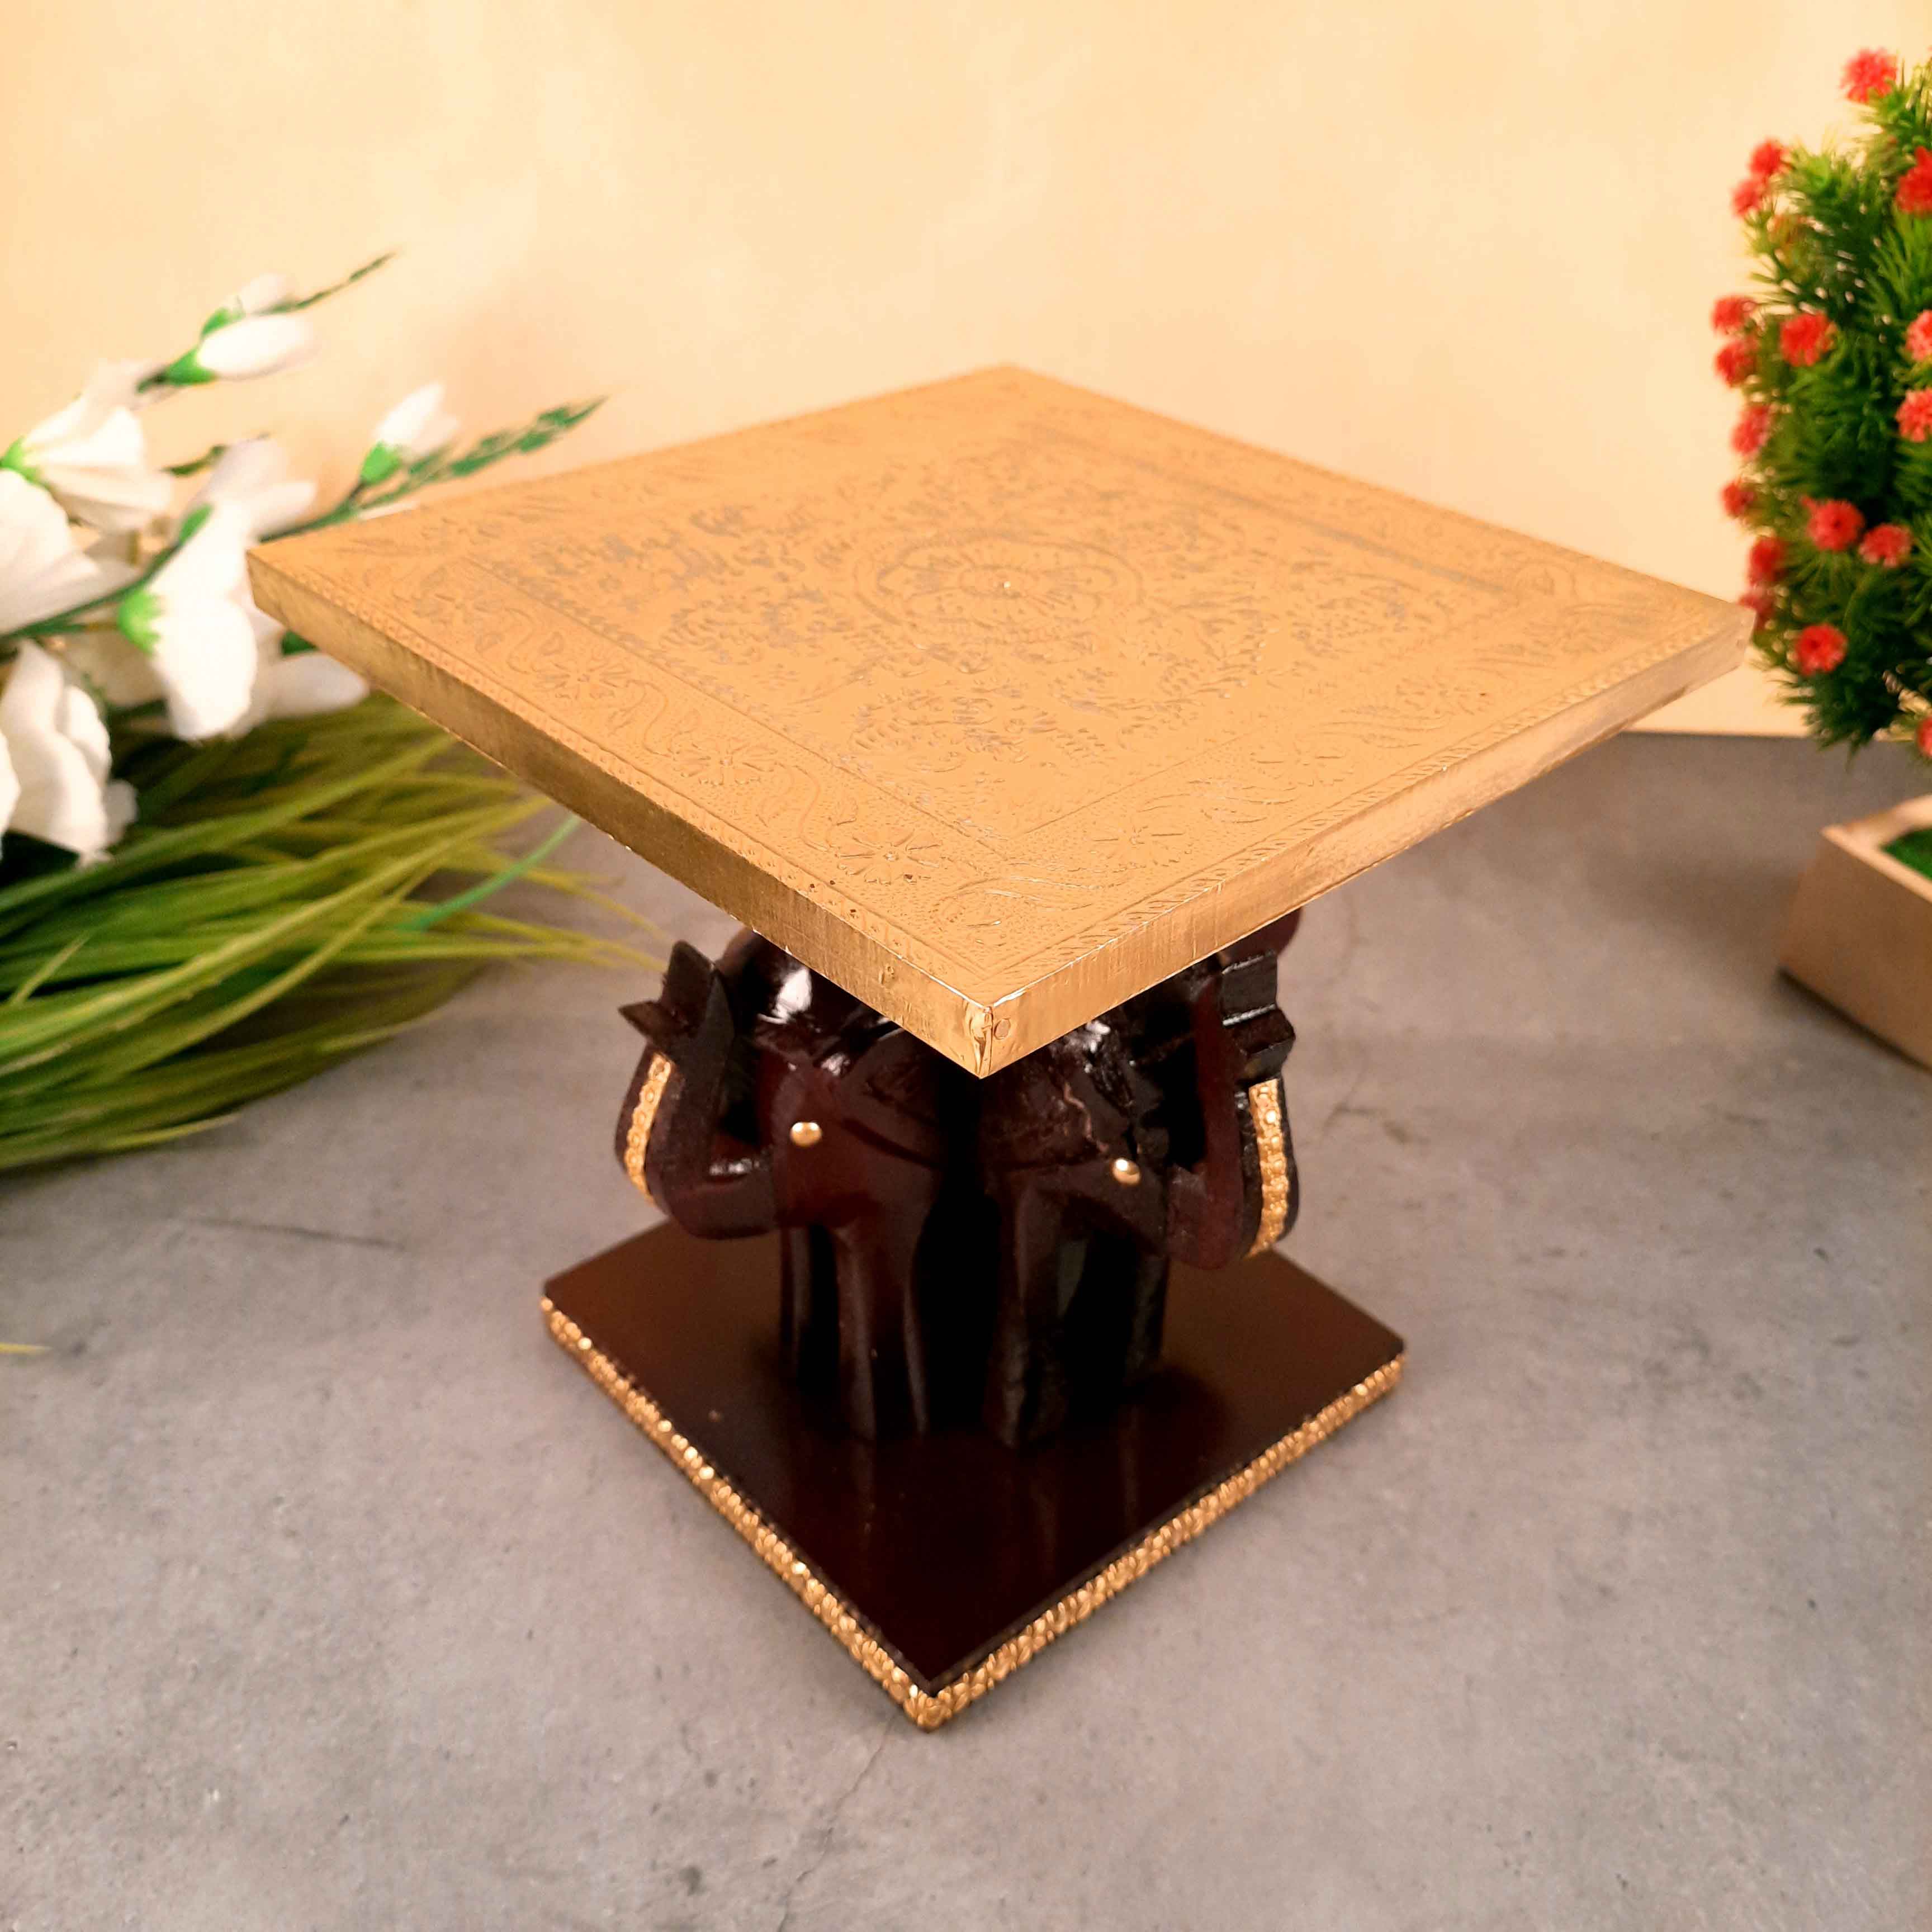 Elephant Cake Stand | Elephant Small Table Showpiece - For Home Decor & Gifts - 8 Inch - Apkamart